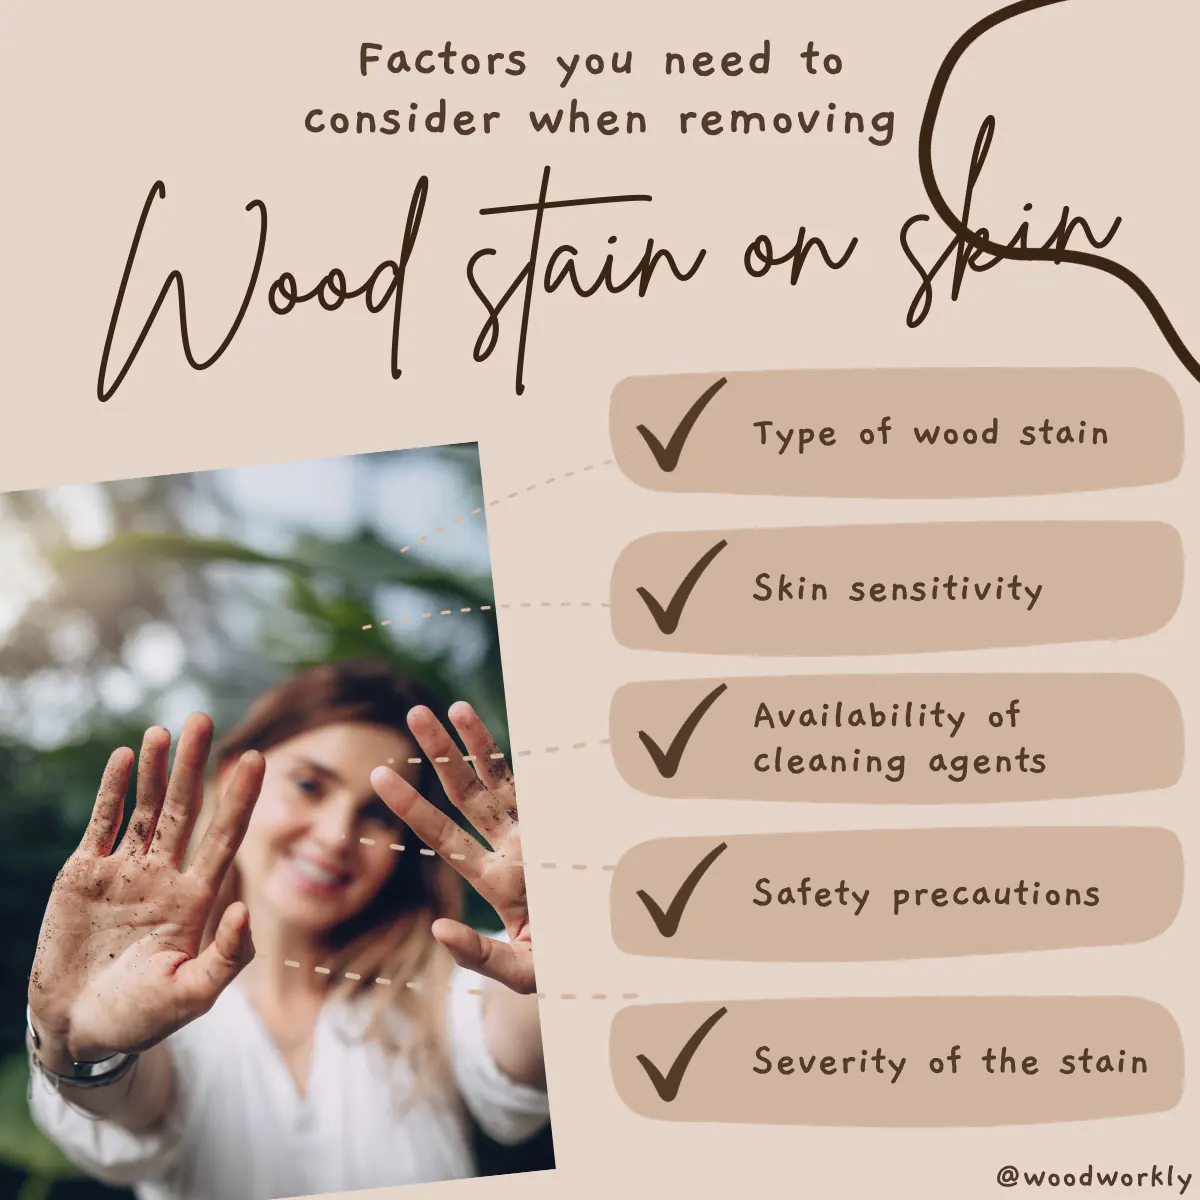 Factors you need to consider when removing wood stain on skin